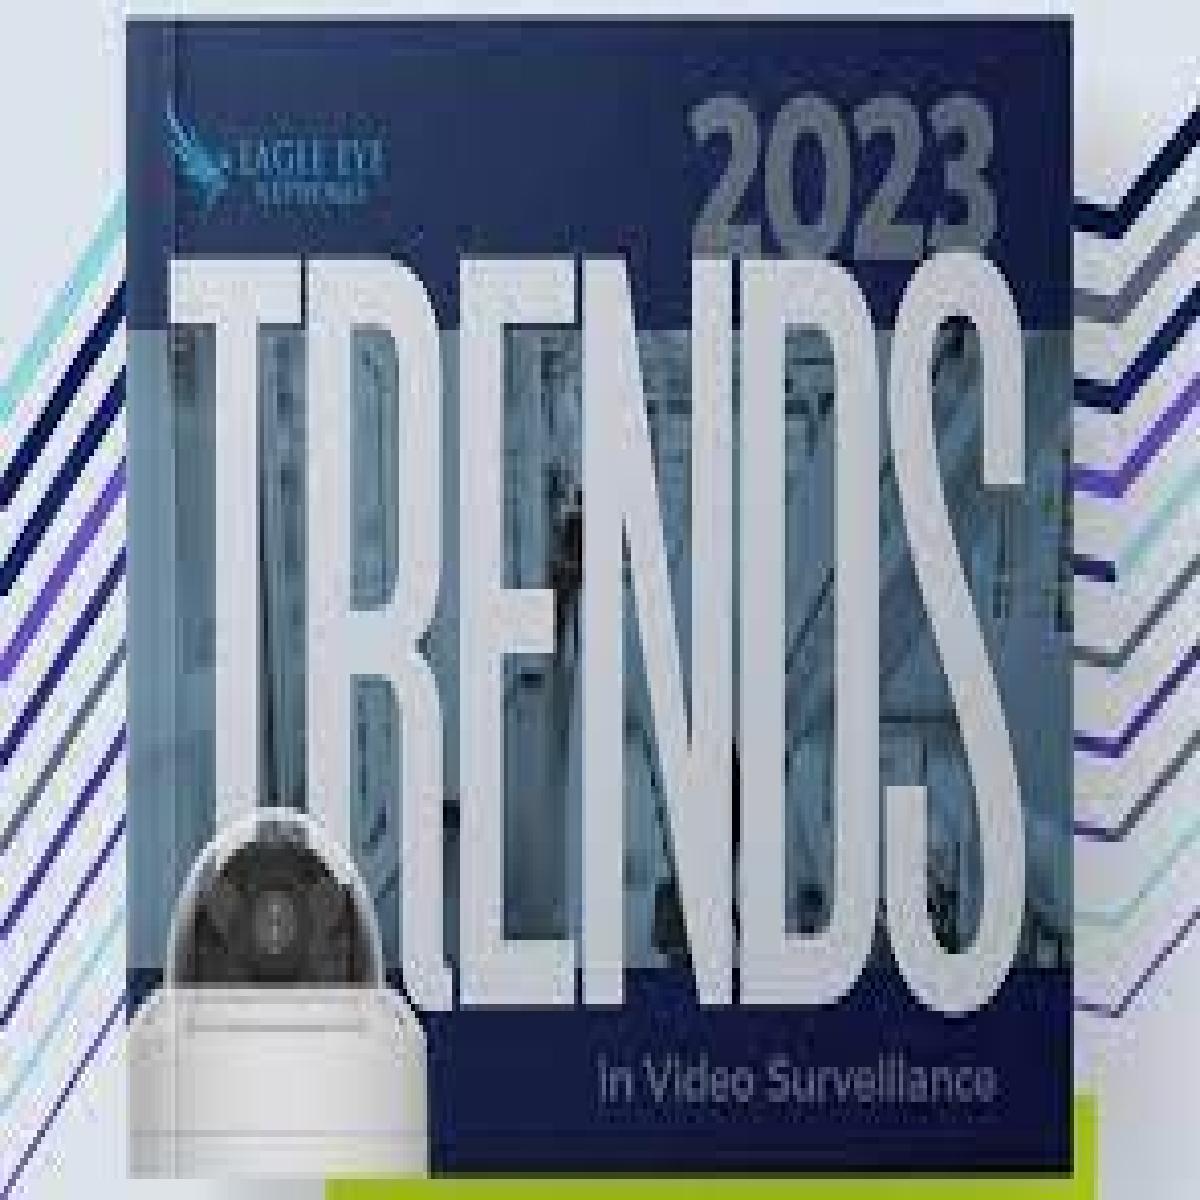 Eagle Eye Networks Releases 2023 Video Surveillance Trends Report